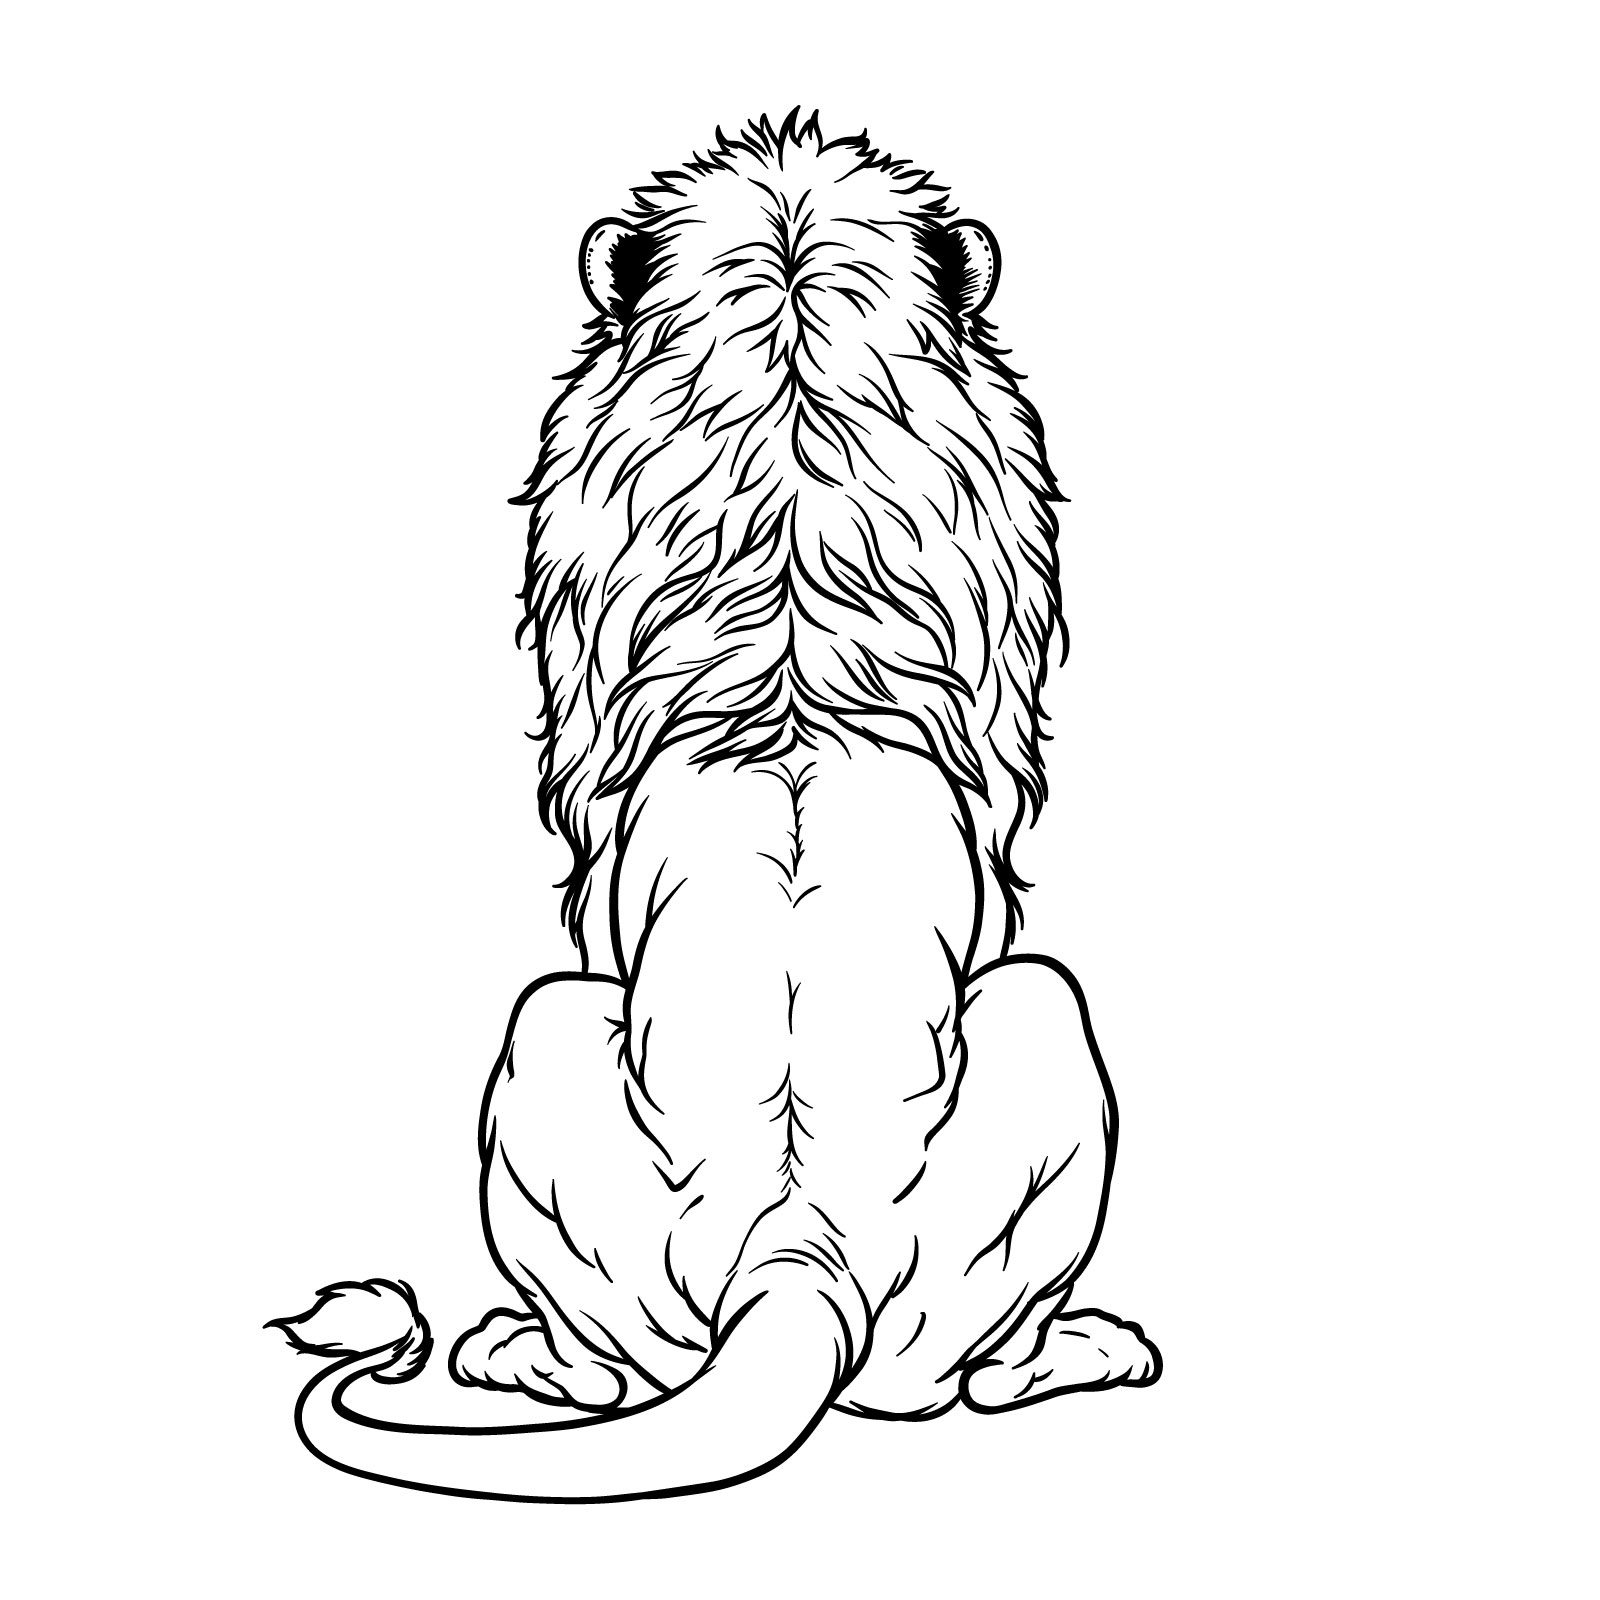 How to draw a lion back view